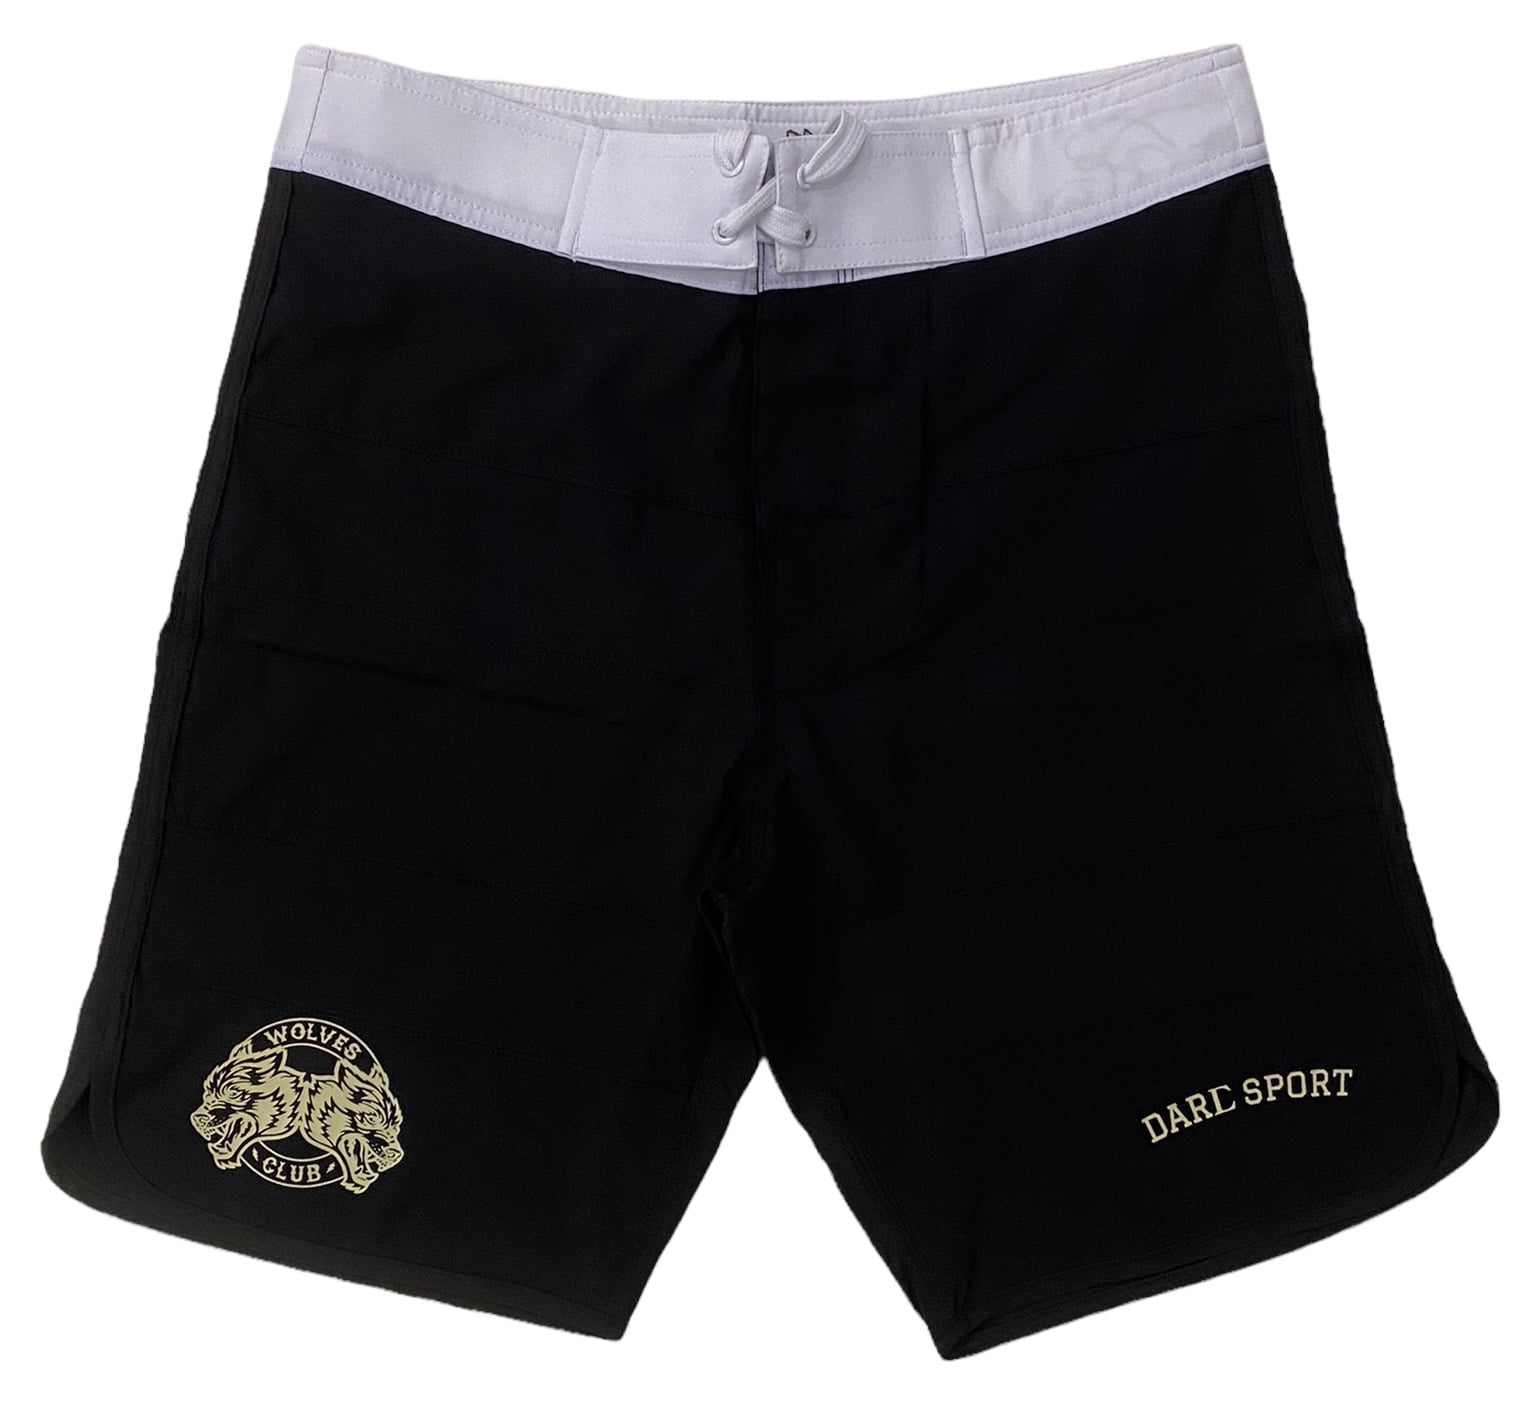 Darc Sport Men's Vicious Ones Stage Shorts Boardshorts With Inner Mesh  Liner (28, Black/White)